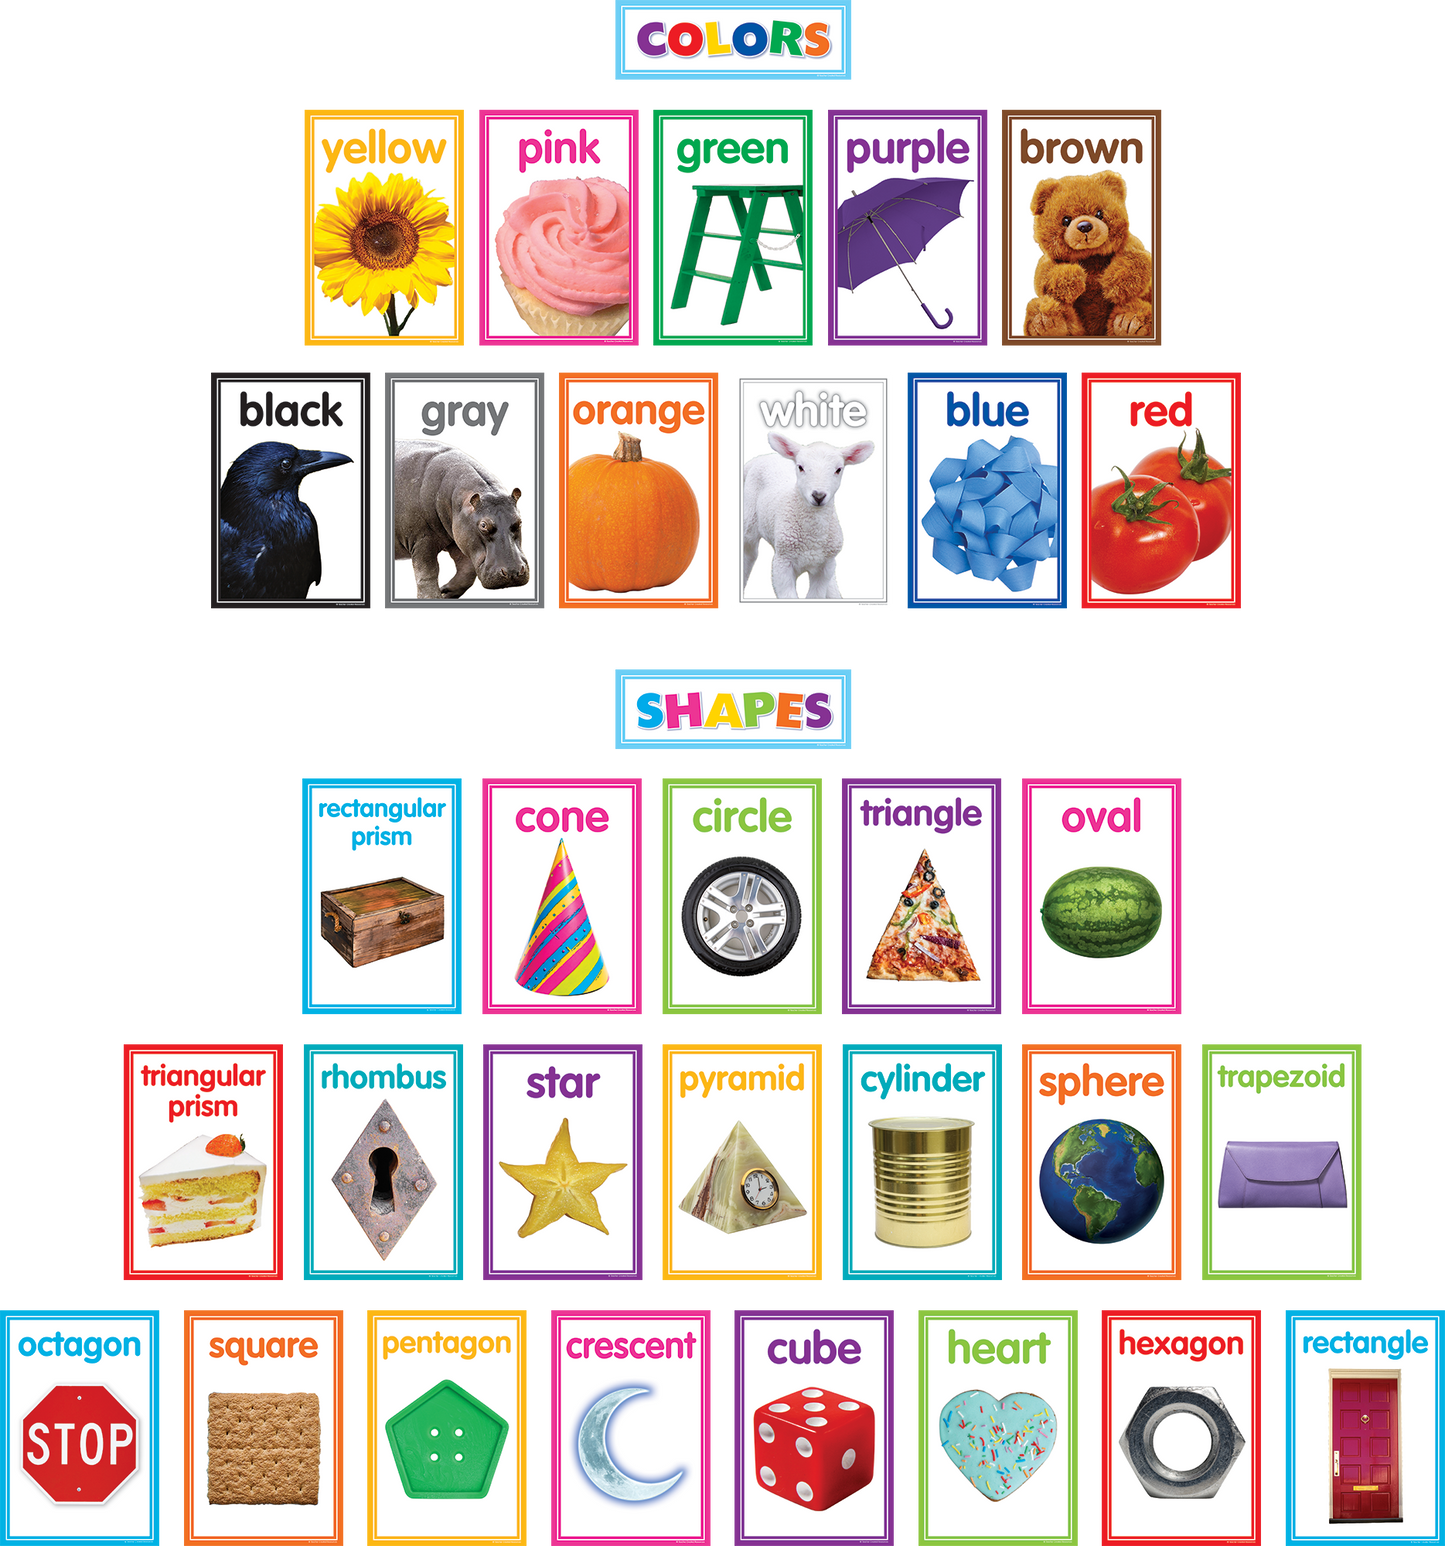 Colorful Photo Shapes & Colors Cards Bulletin Board